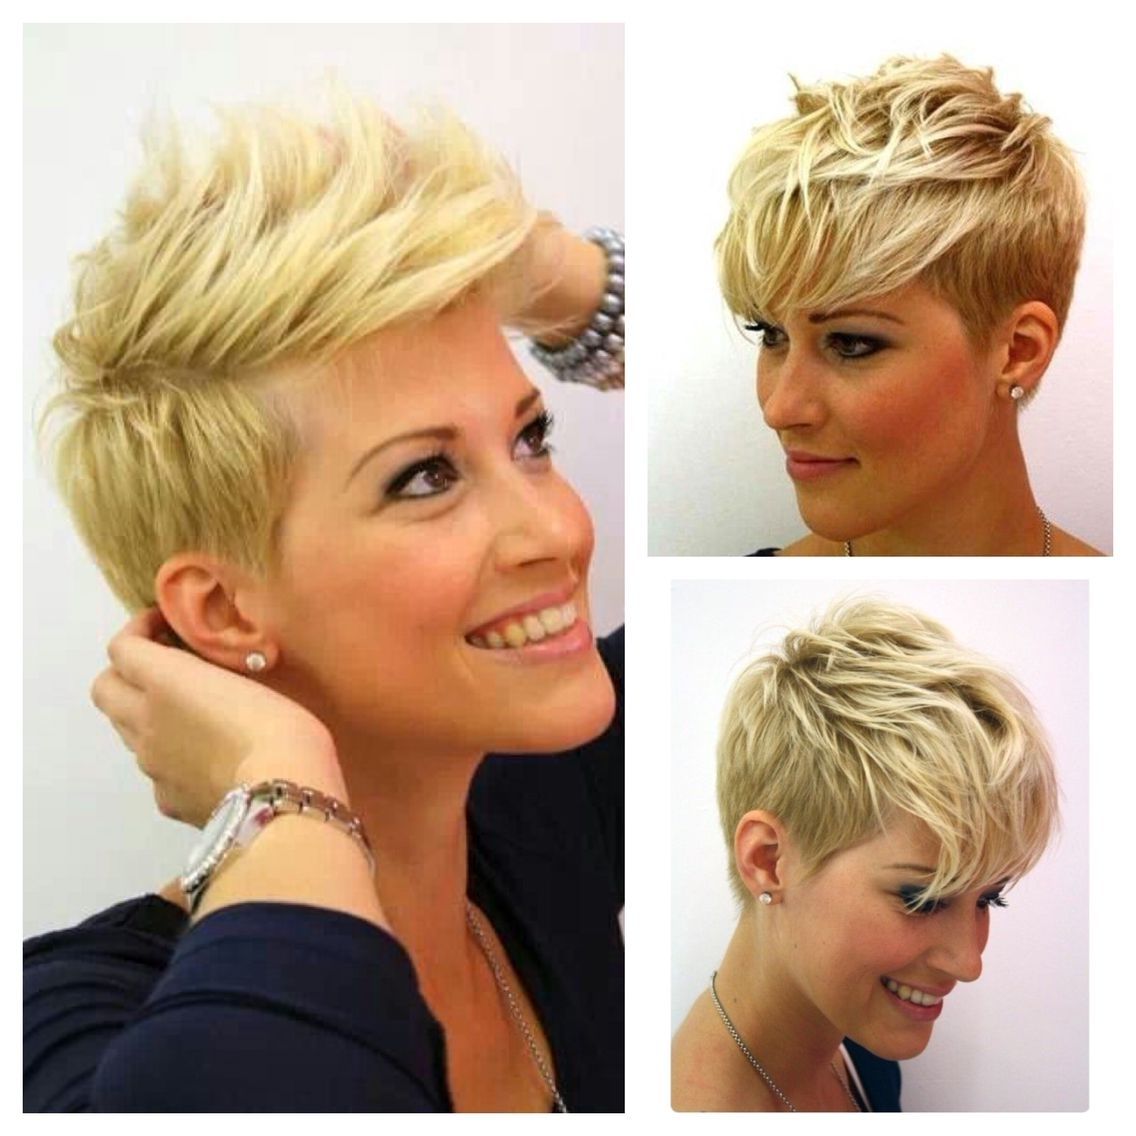 Super Cute Short Layered Pixie Cut For Fine Hair | Fun Things For In Best And Newest Short Sassy Pixie Hairstyles (View 7 of 15)